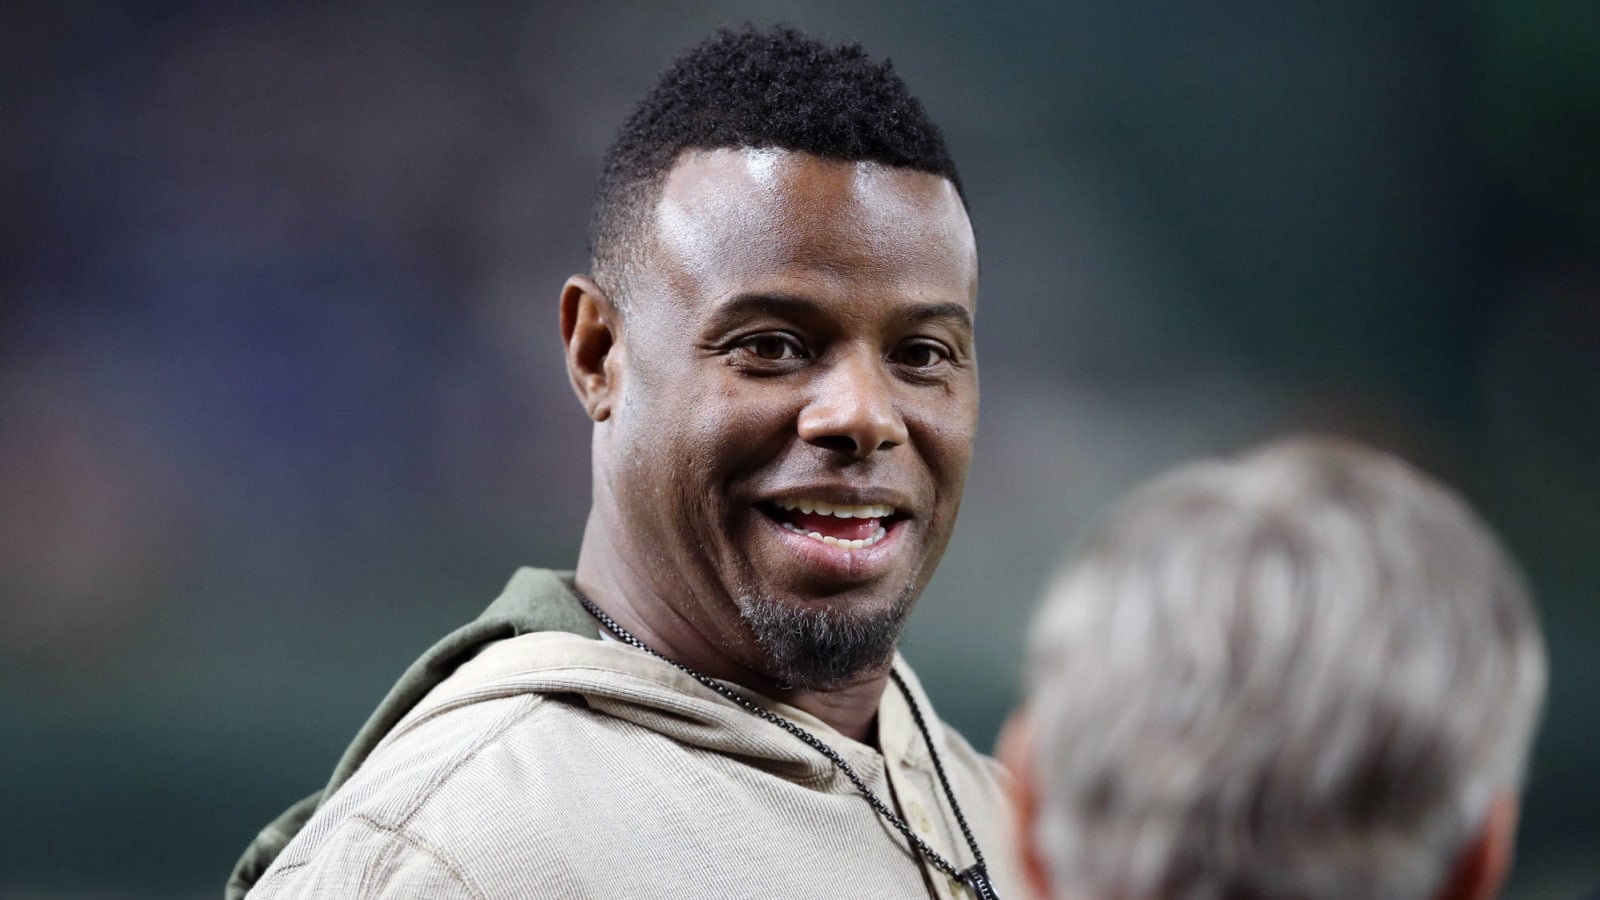 Ken Griffey Jr. reveals why he hated the Yankees